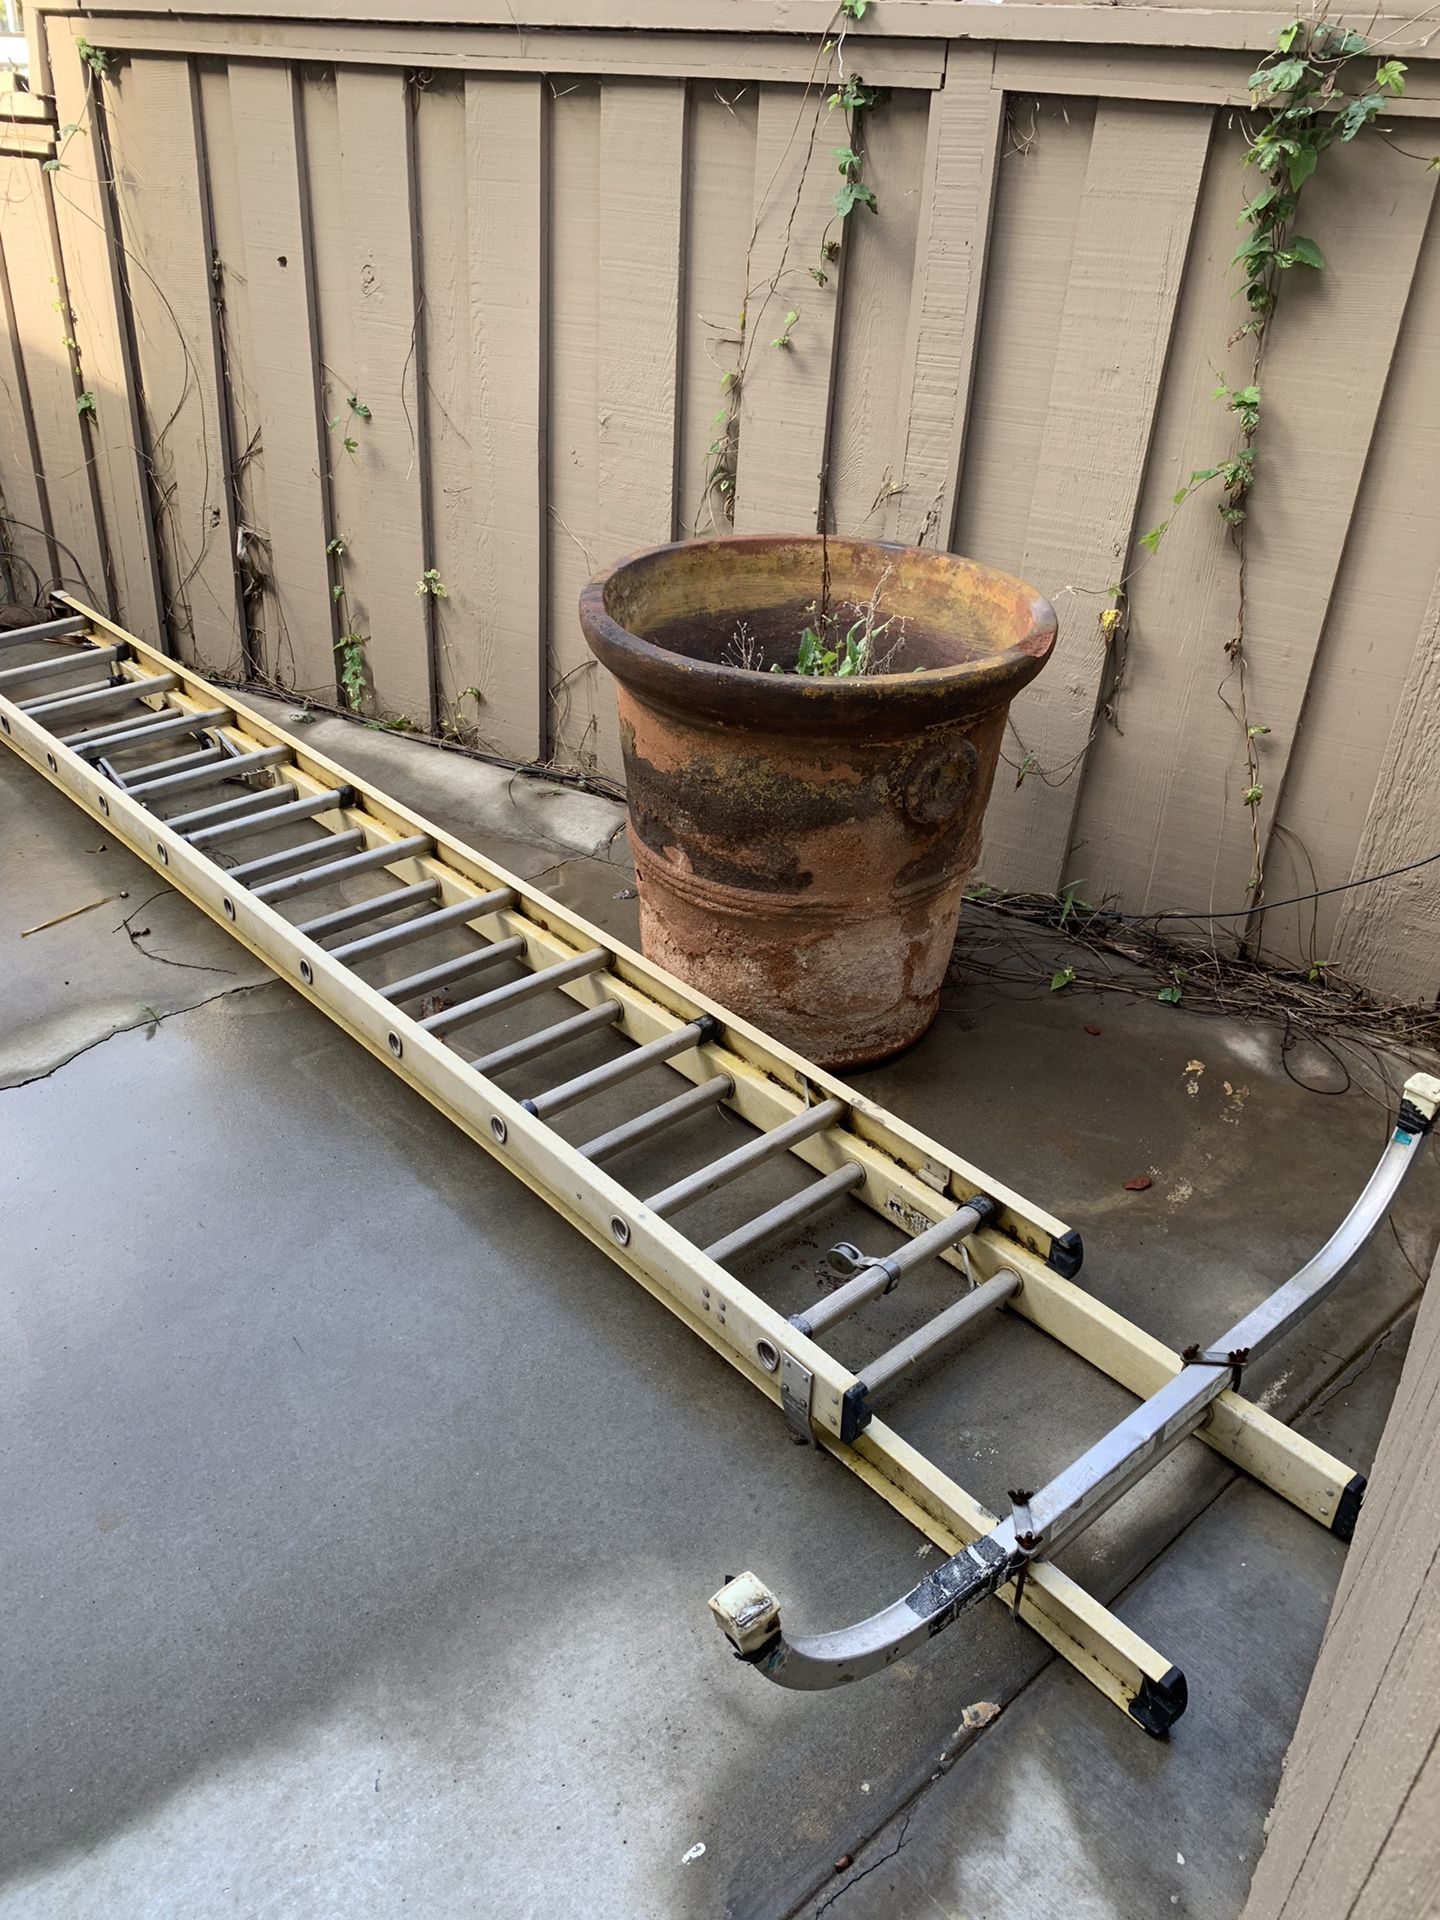 Extension ladder with braces. Needs new rope. $150.